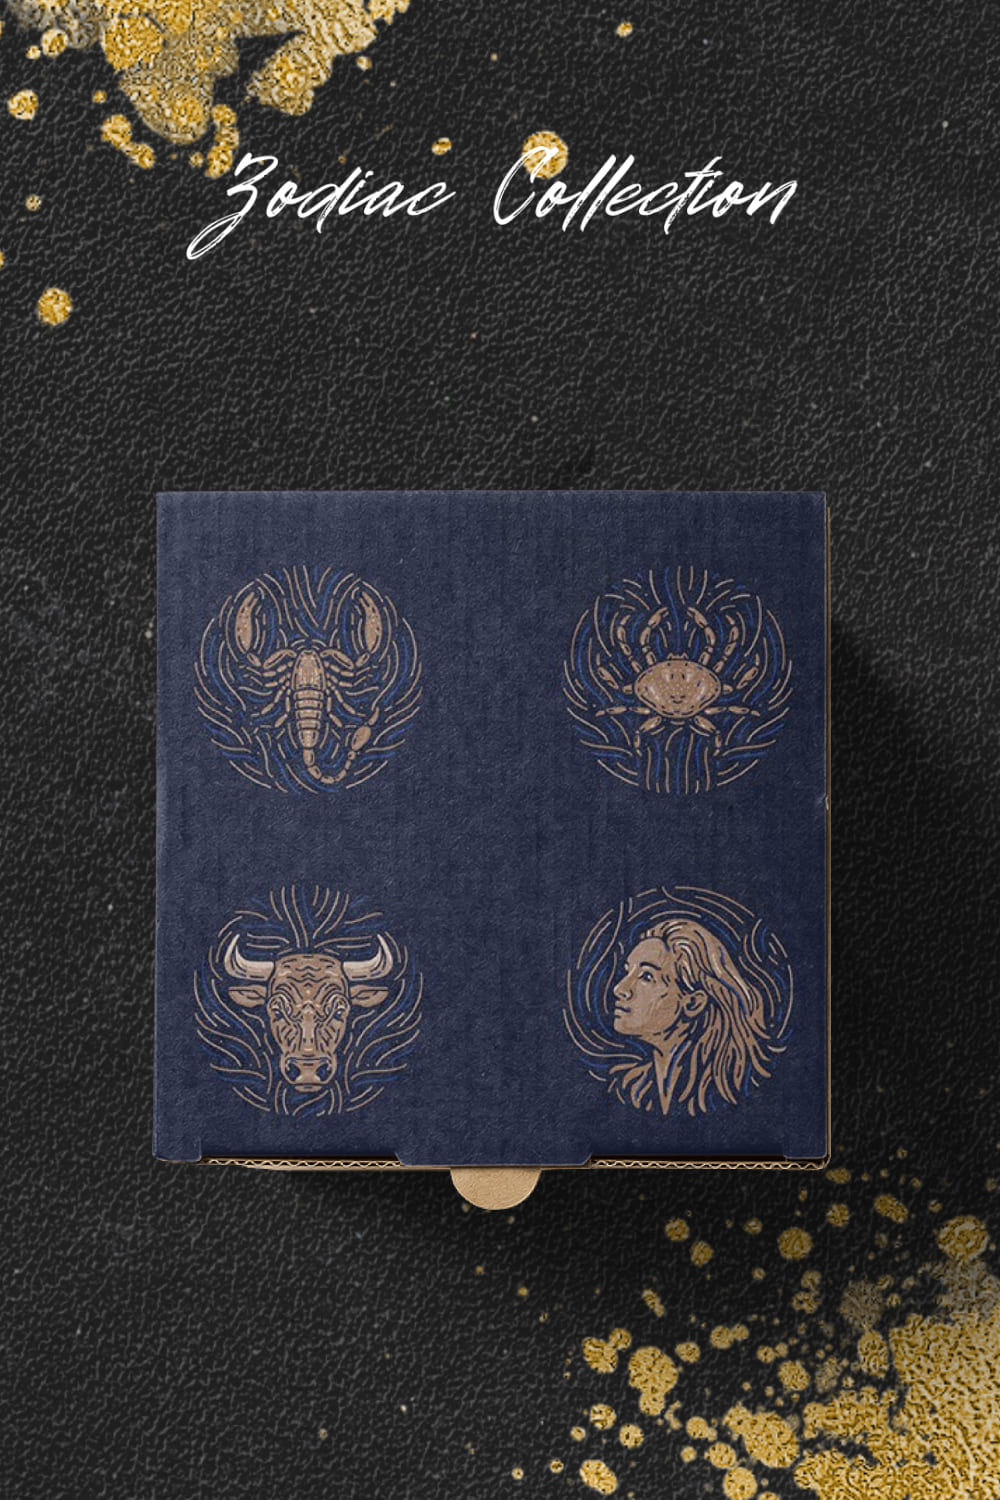 Zodiac Collection - pinterest image preview.